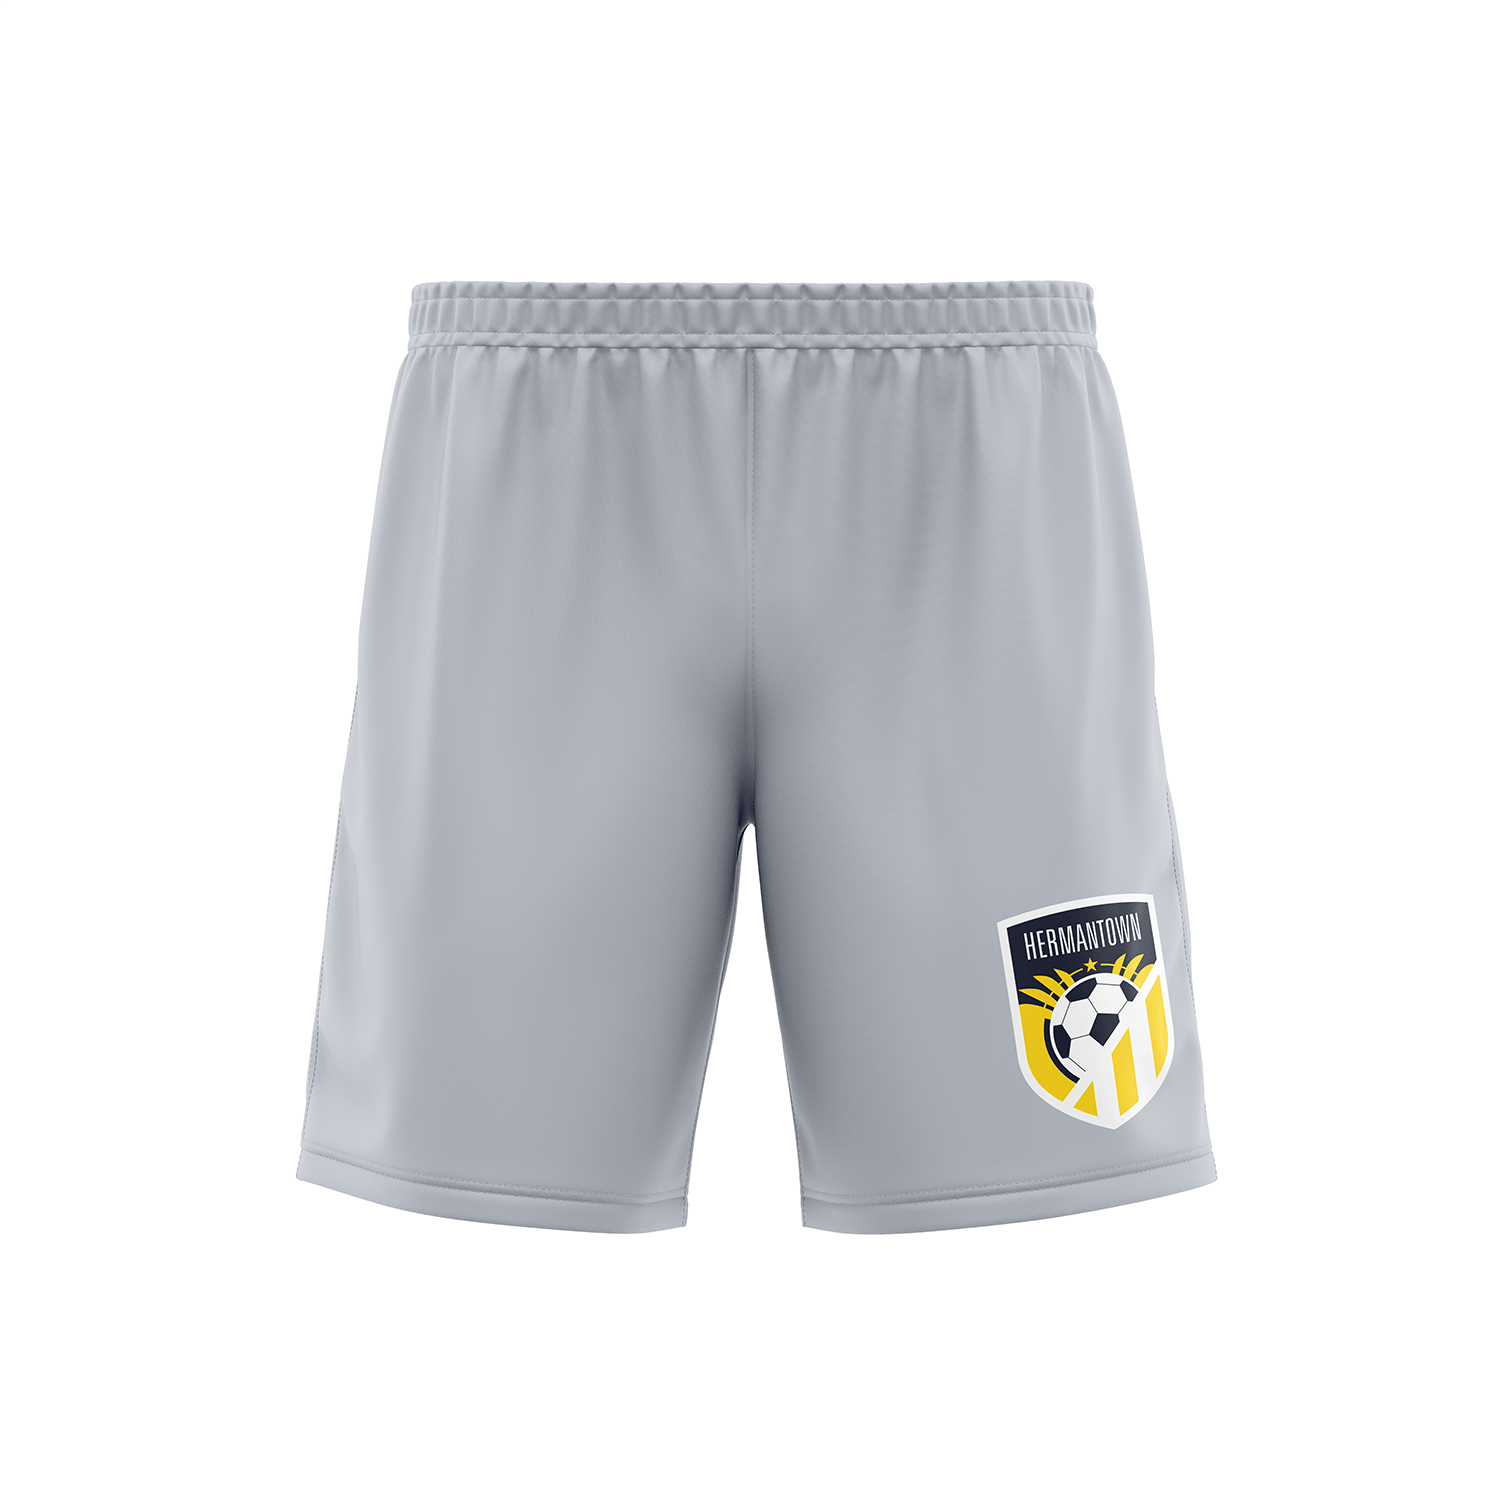 Hermantown Soccer Adult Shorts - DSP On Demand